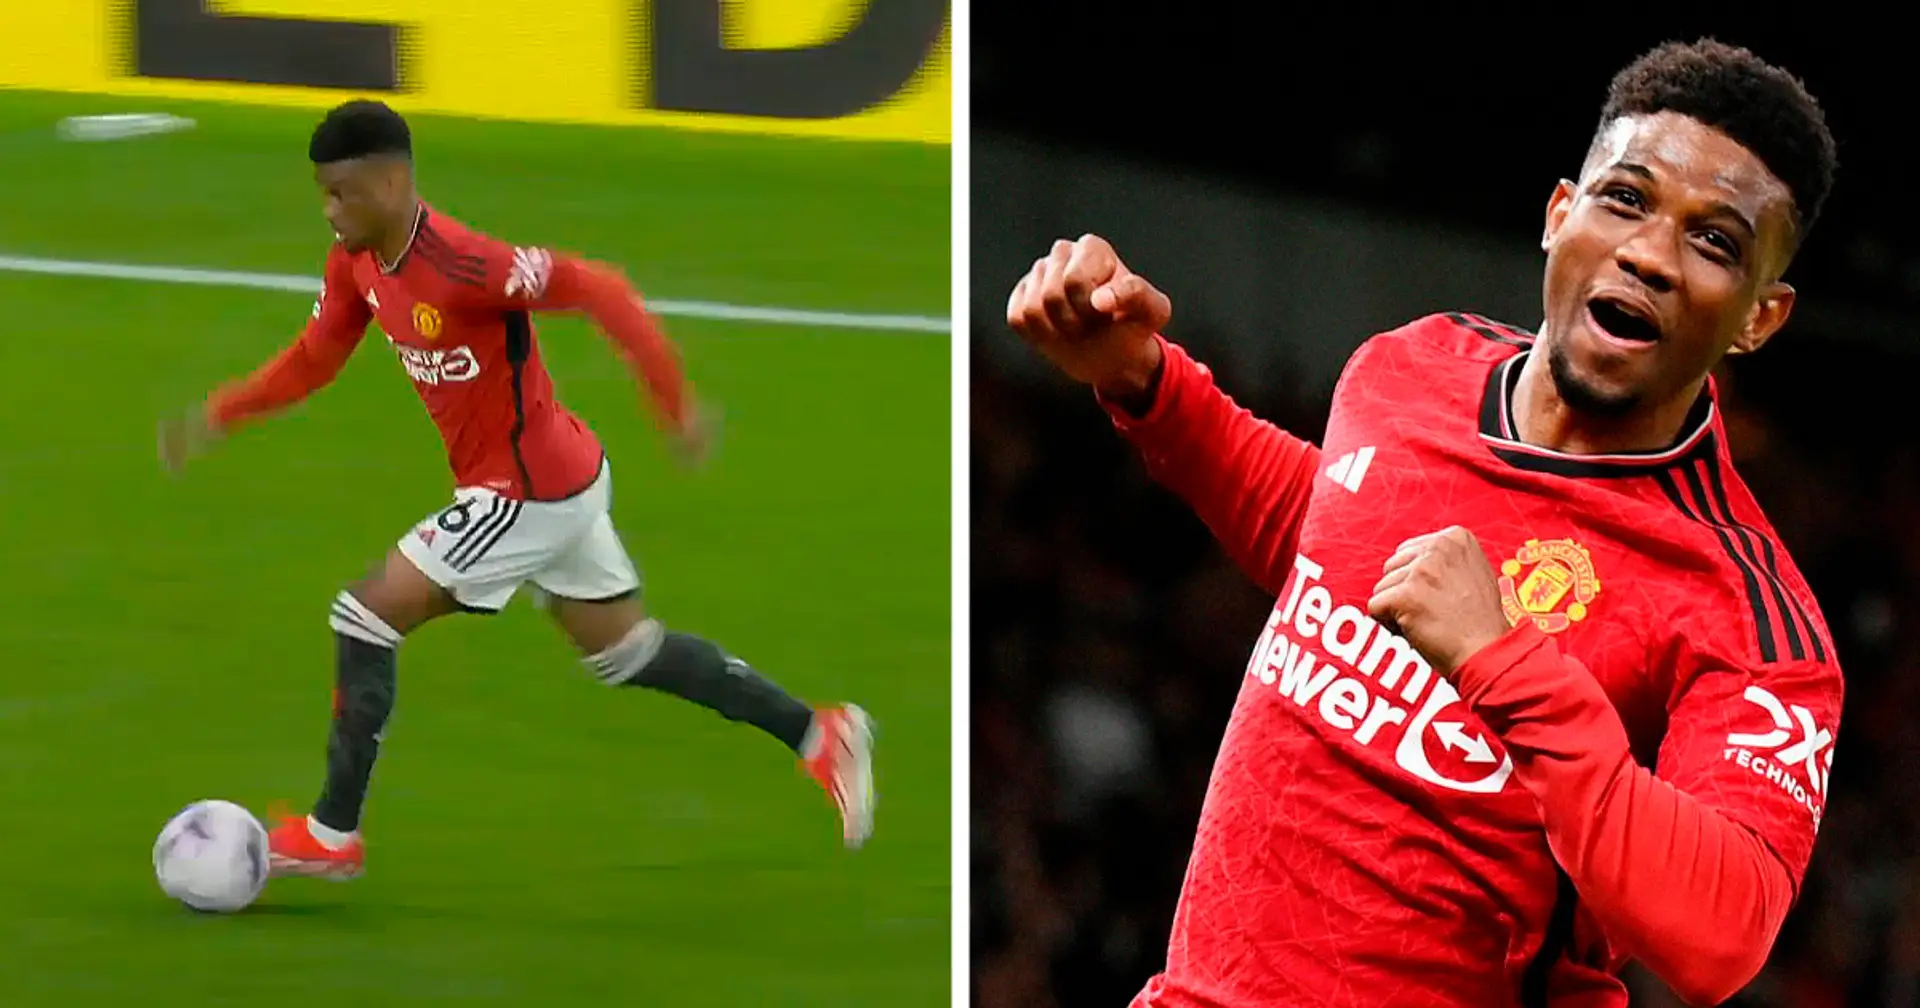 United fan shares a very unpopular opinion about Amad Diallo – it's not what fans expect in the future